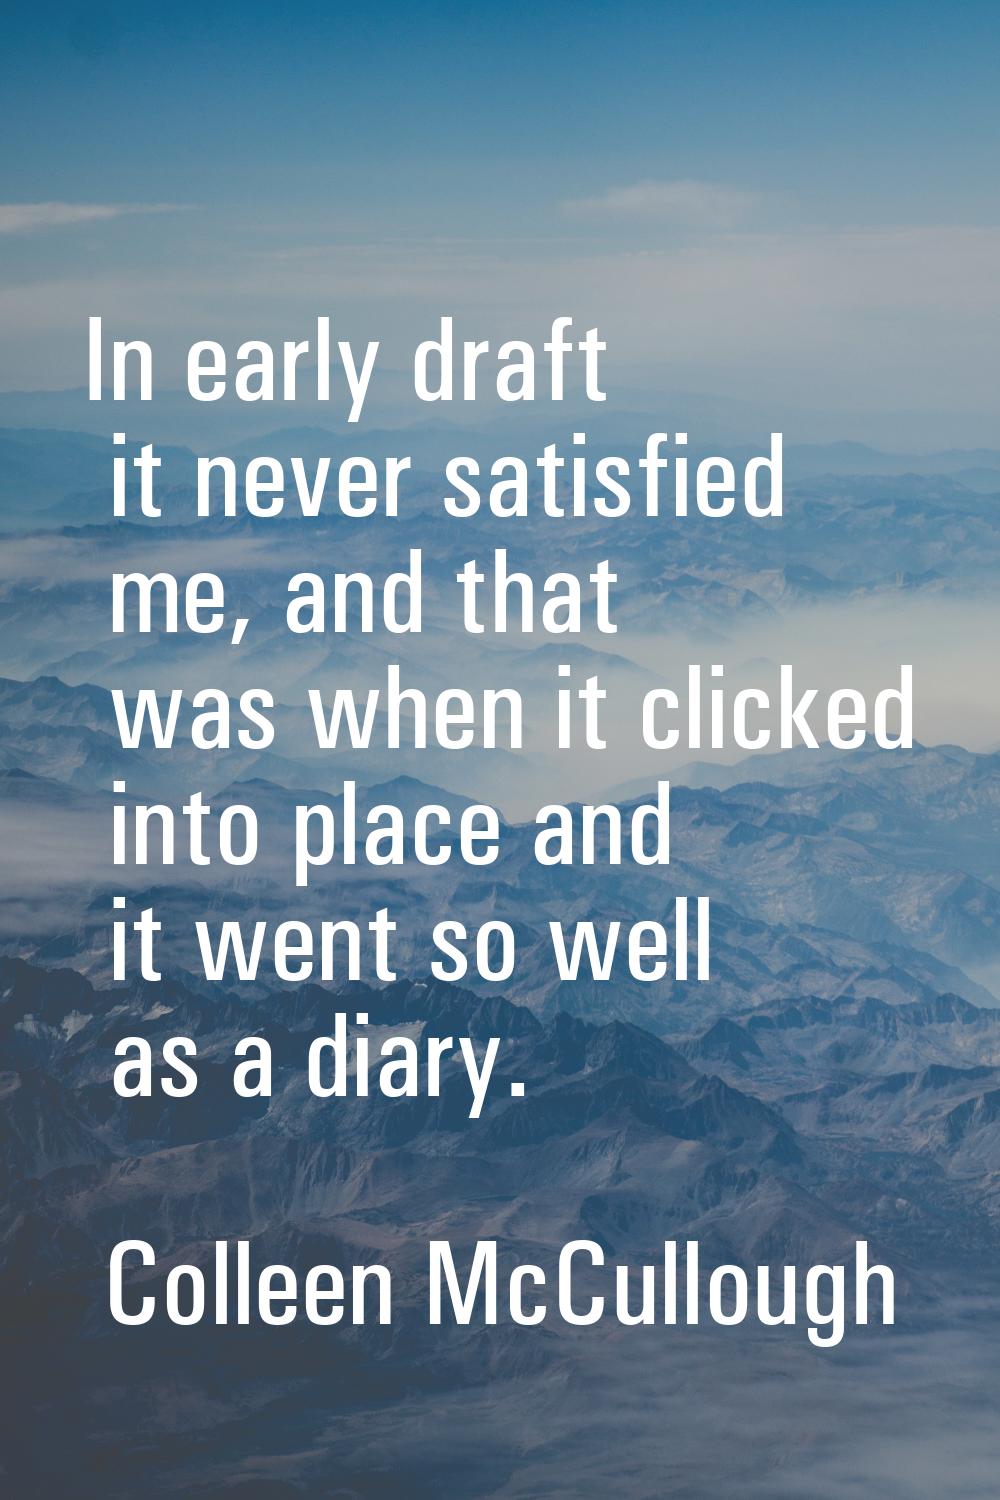 In early draft it never satisfied me, and that was when it clicked into place and it went so well a